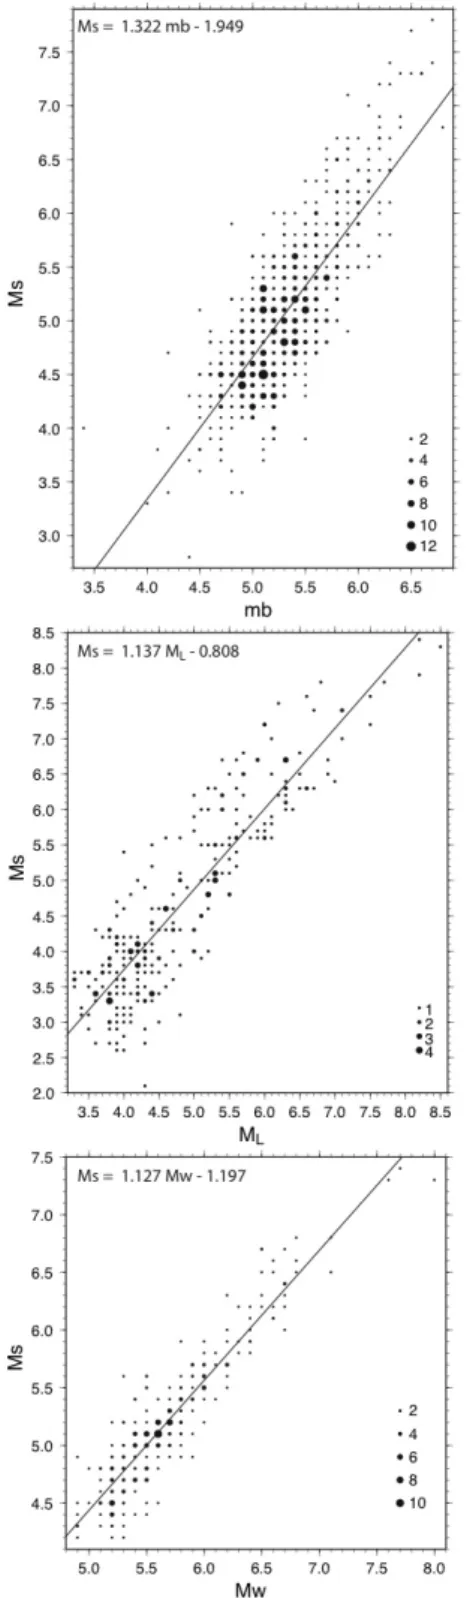 Fig. 1. Linear relation between different magnitudes, from top to bottom is presented M s as a function of mb, M L , and M w ,  respec-tively; continuous lines represent the least squares fits with relation shown in the upper left corner